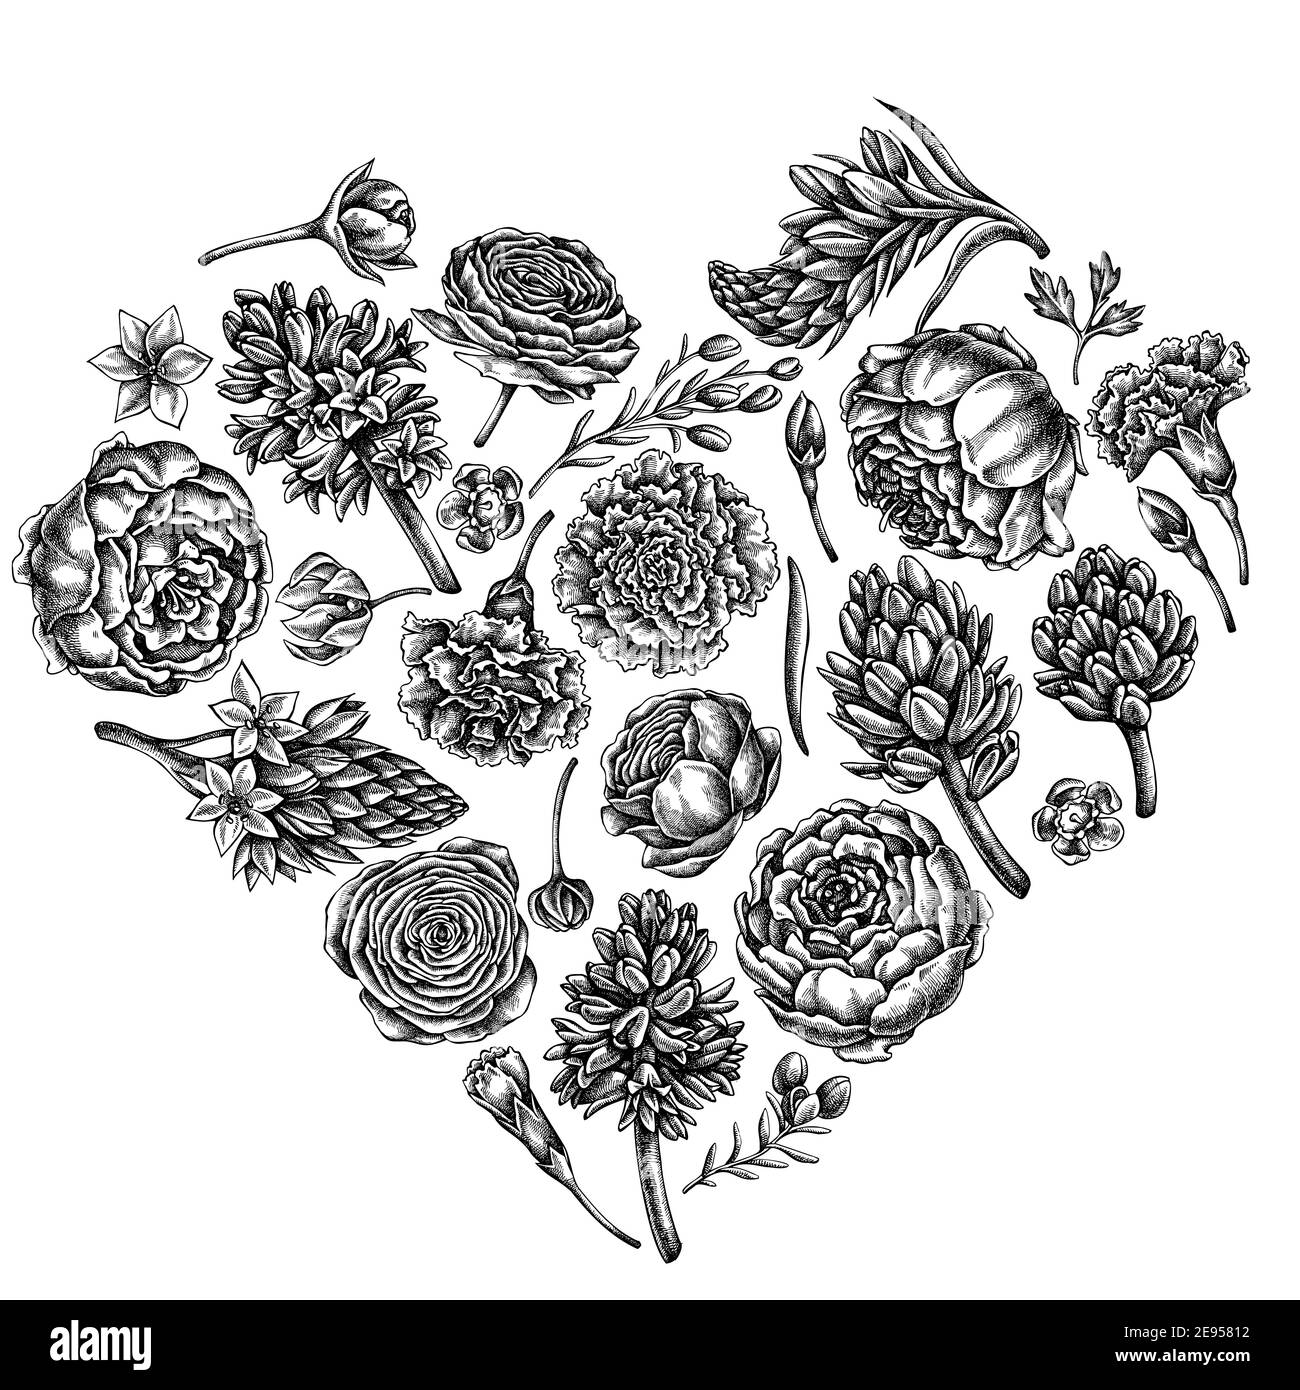 Heart floral design with black and white peony, carnation, ranunculus, wax flower, ornithogalum, hyacinth Stock Vector